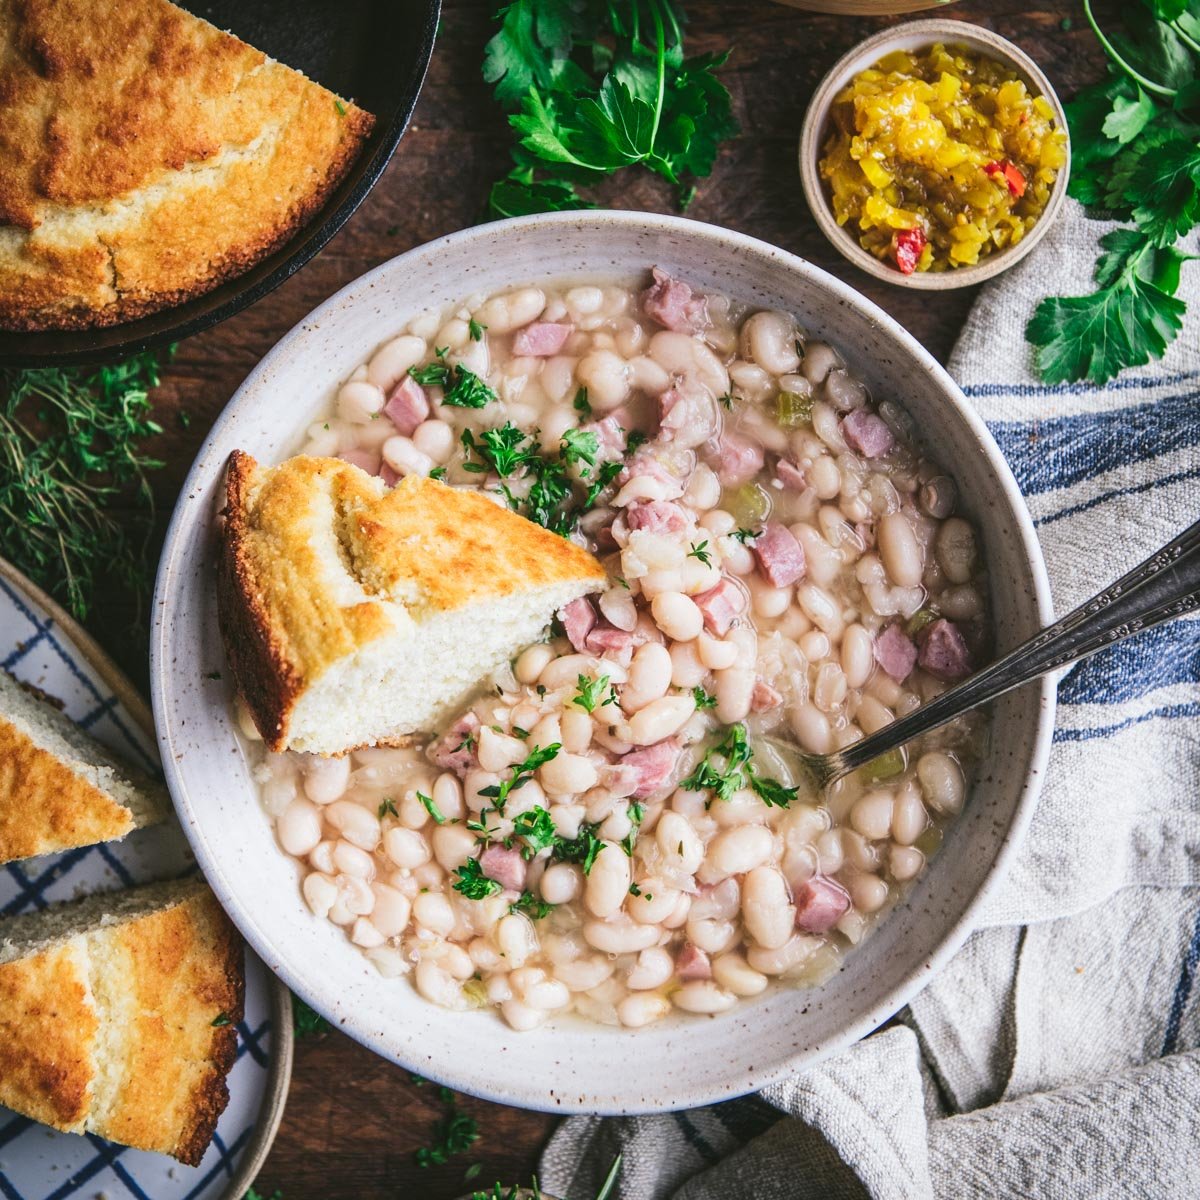 Southern ham and beans in a bowl with a side of cornbread.